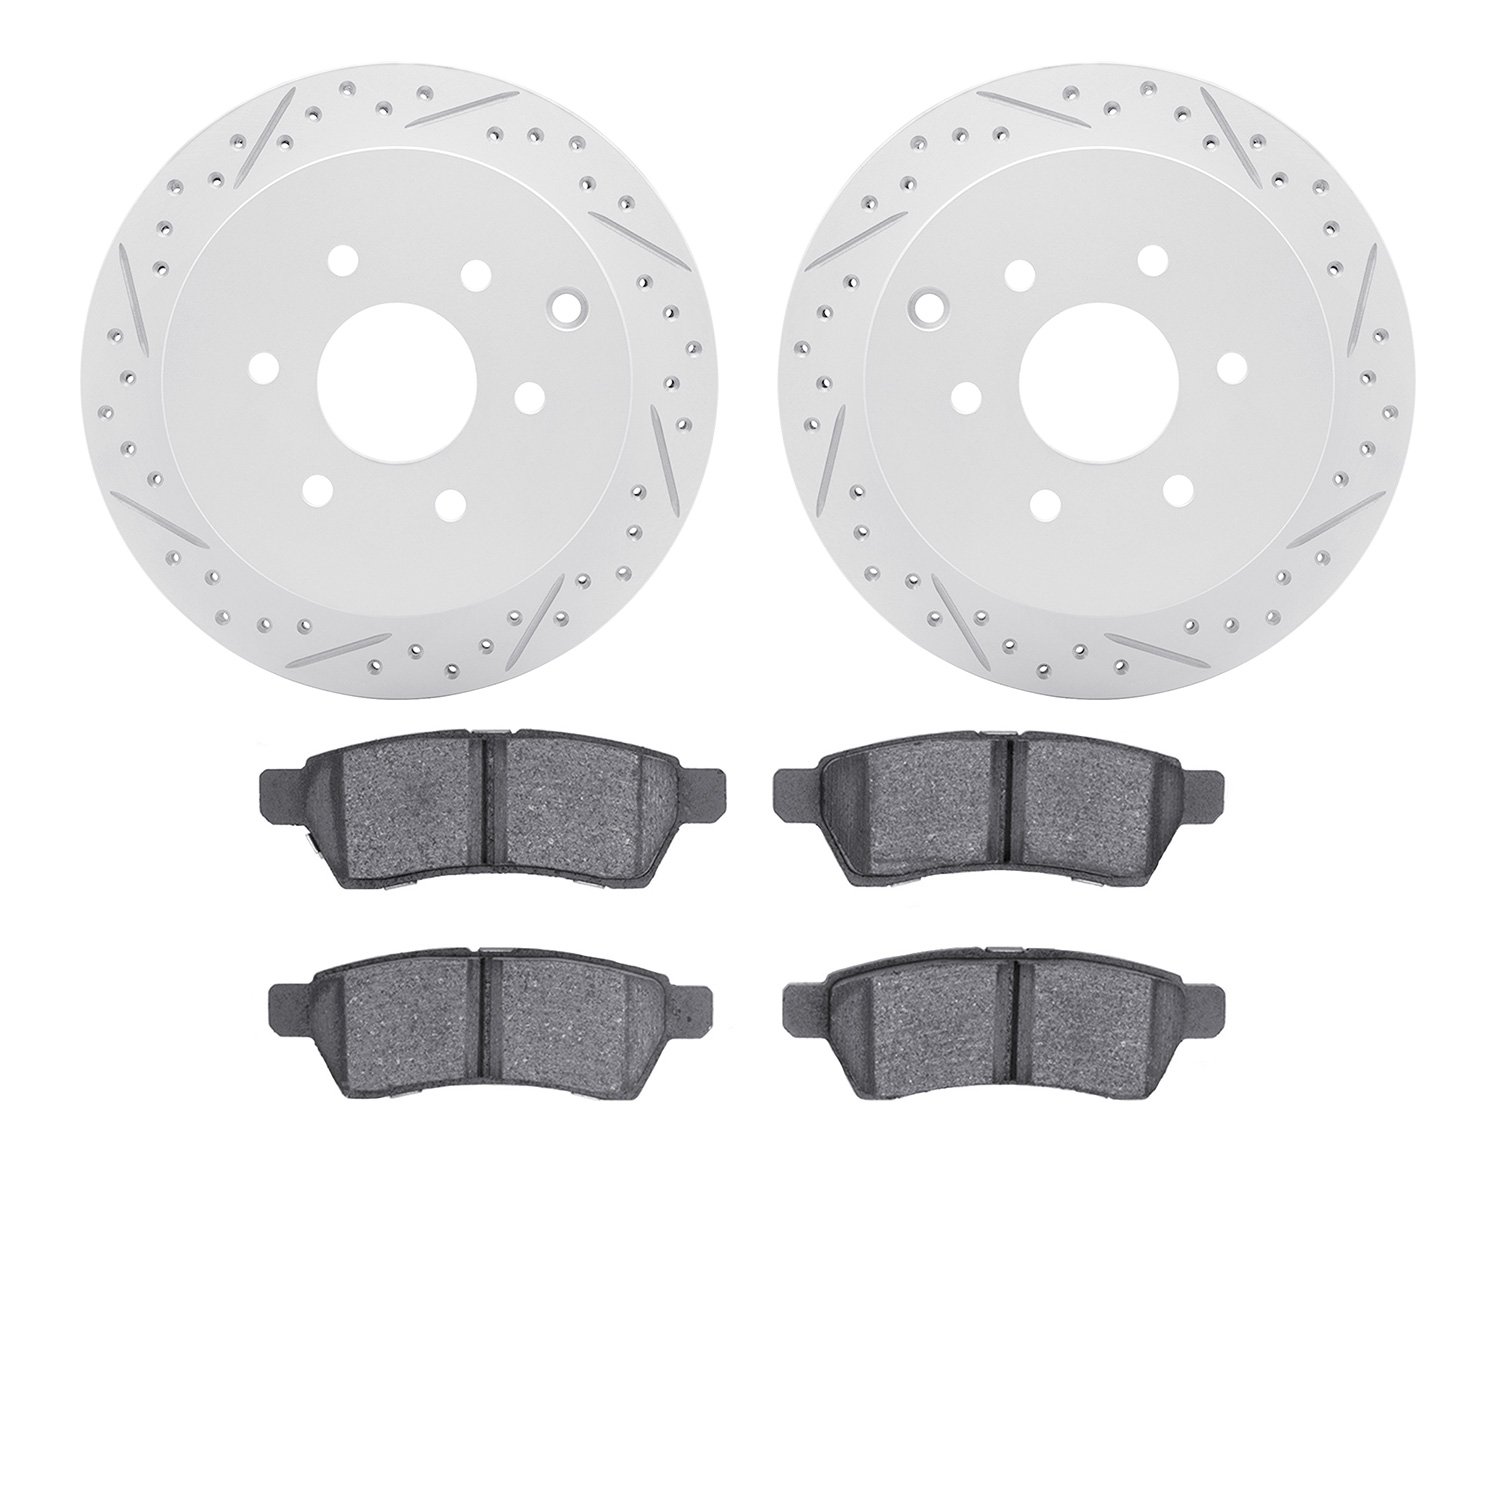 2502-67110 Geoperformance Drilled/Slotted Rotors w/5000 Advanced Brake Pads Kit, Fits Select Multiple Makes/Models, Position: Re